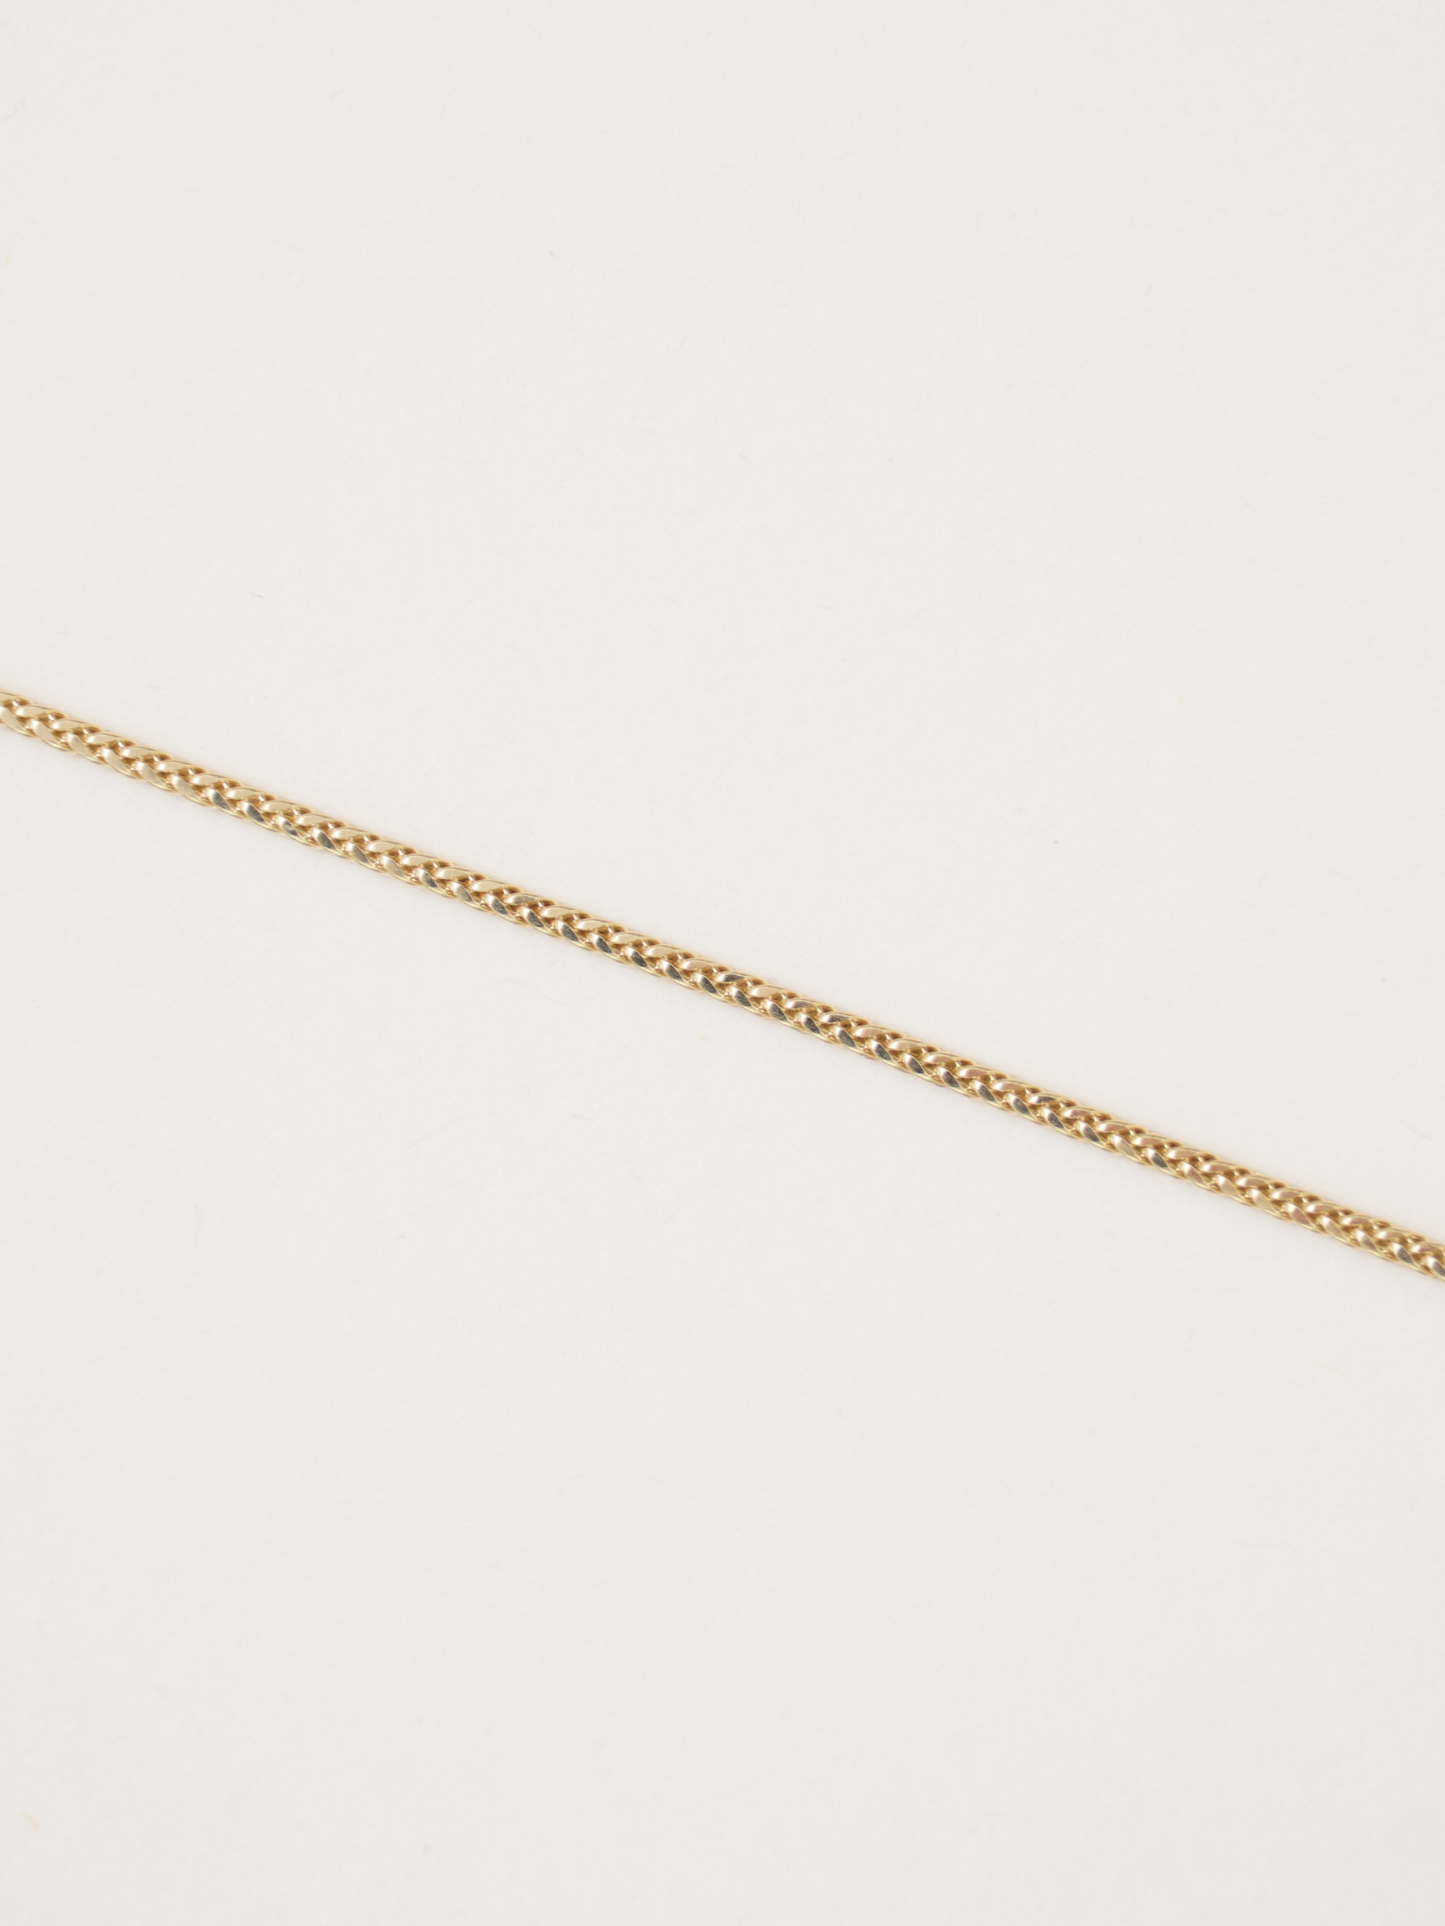 20" Weath x Light Necklace - Yellow Gold